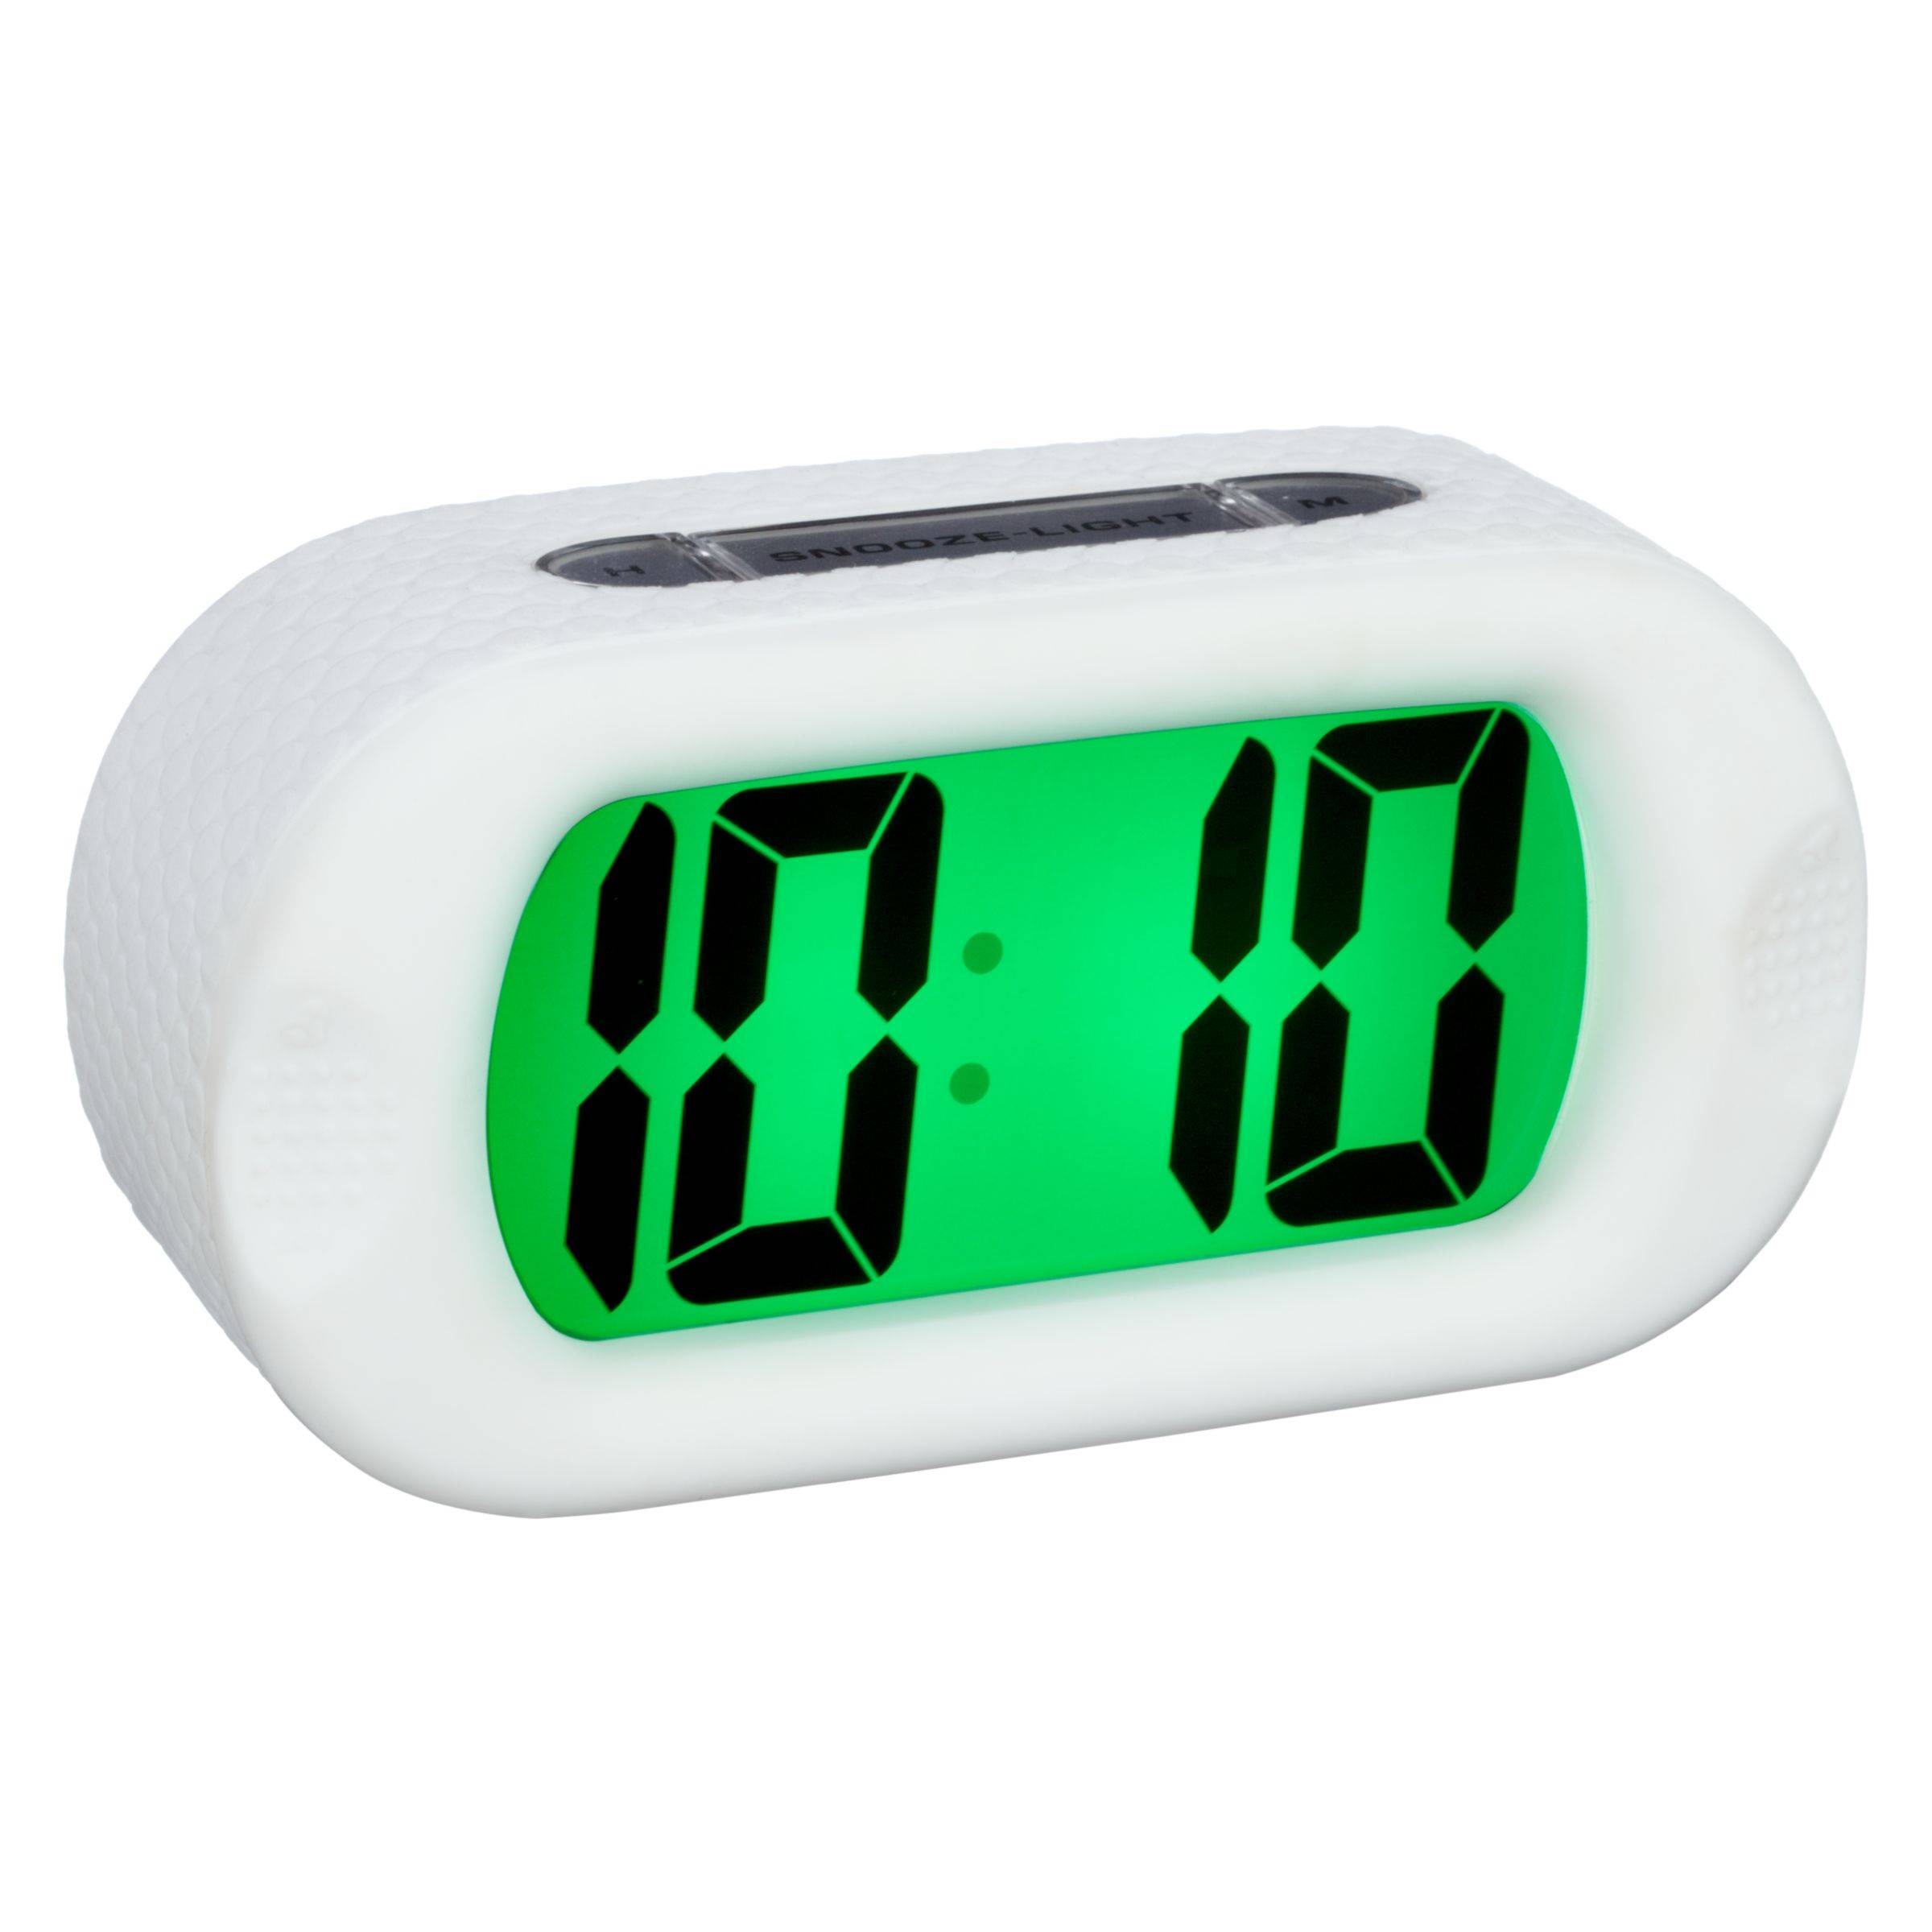 OUR 4ROBP Acctim 13963 Vivo L.C.D Alarm Clock With Black Silicon Casing 